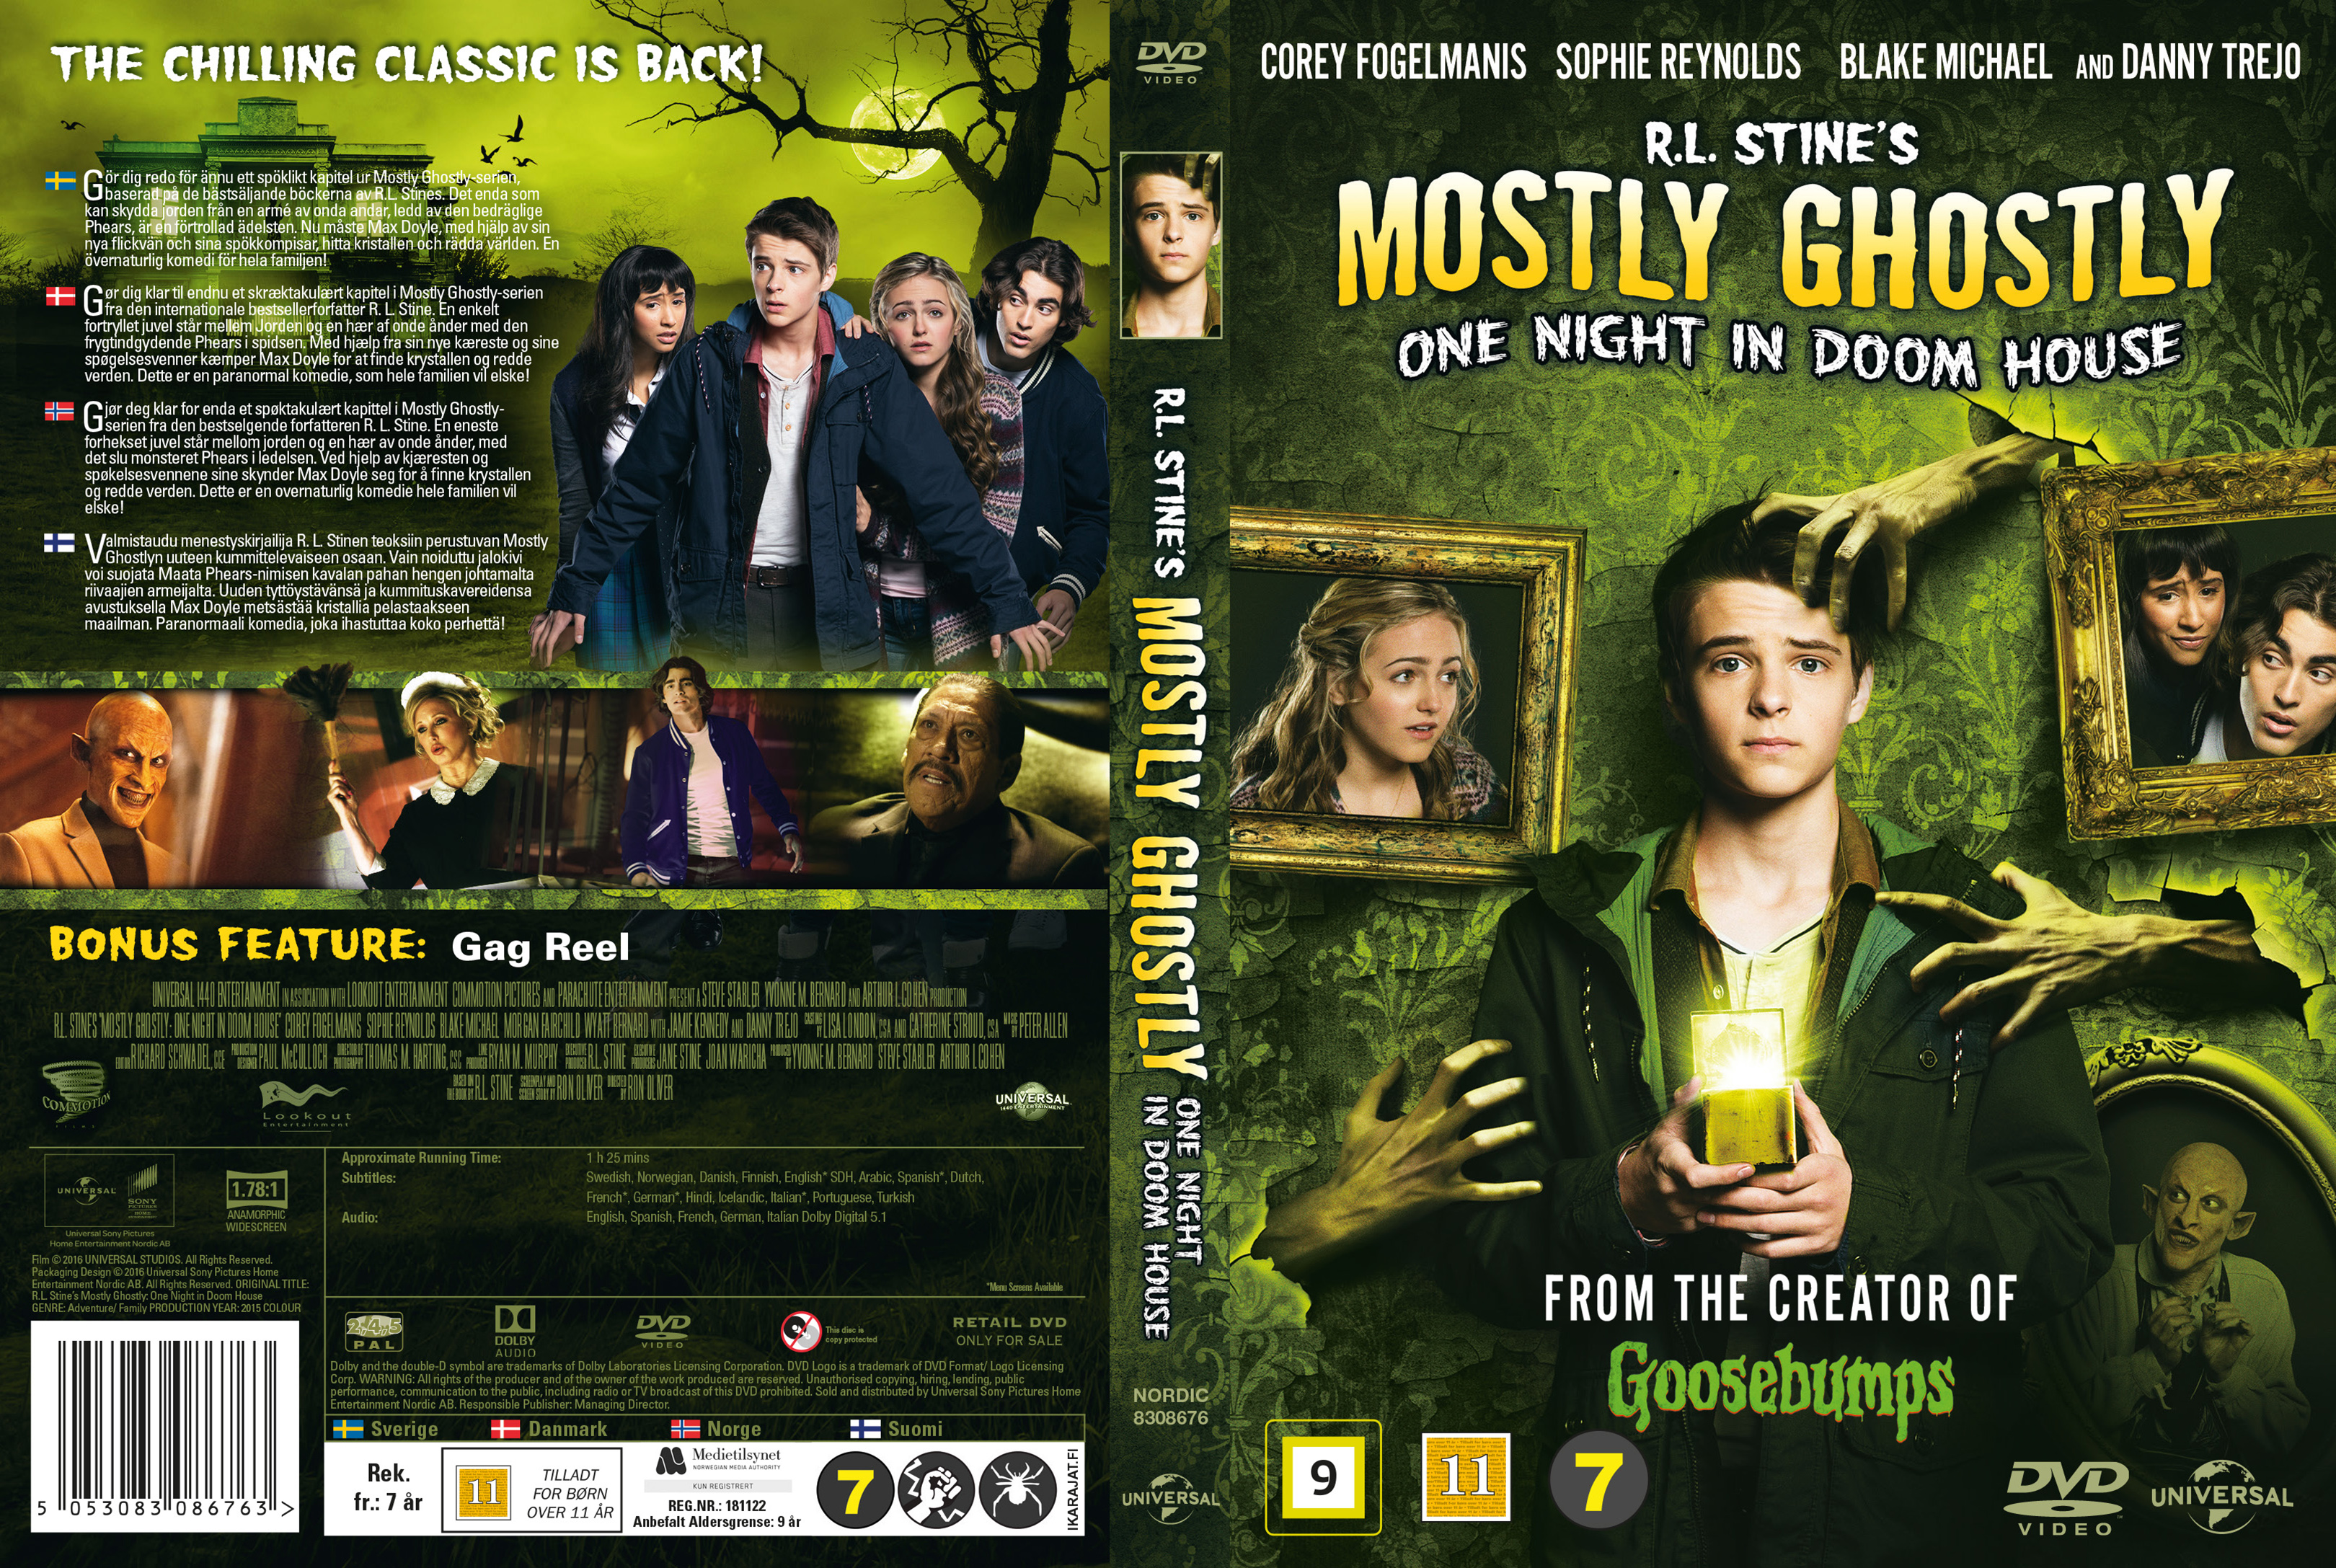 2016 Mostly Ghostly 3: One Night In Doom House